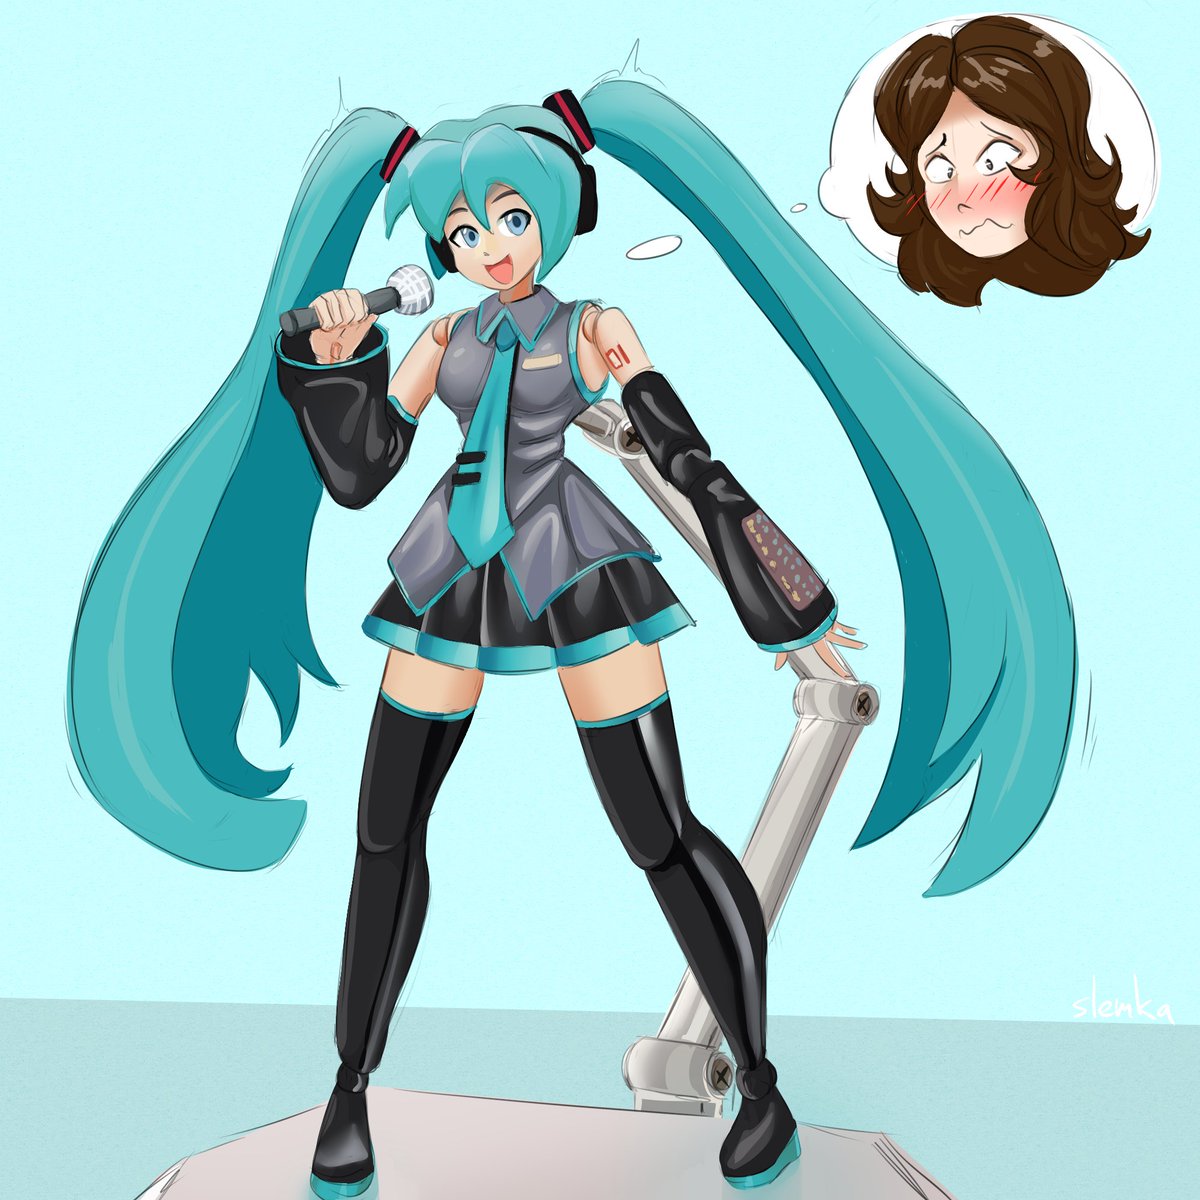 Miku Figurine / TGTF Inanimate
Patreon request for ty_eff